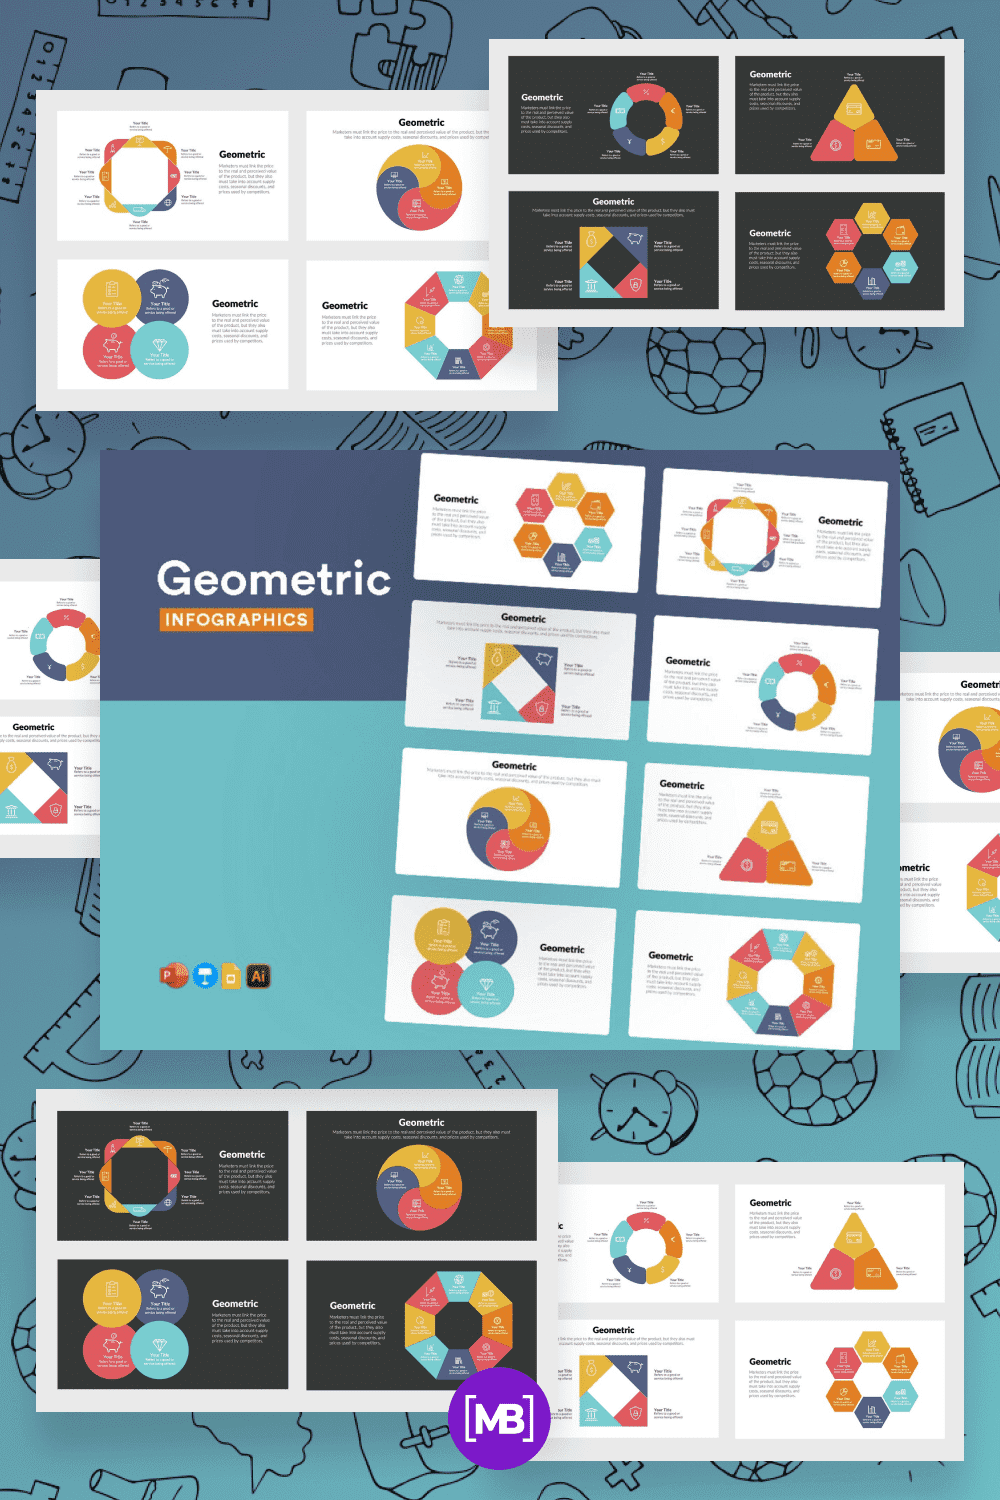 Geometric for education infographics powerpoint template.